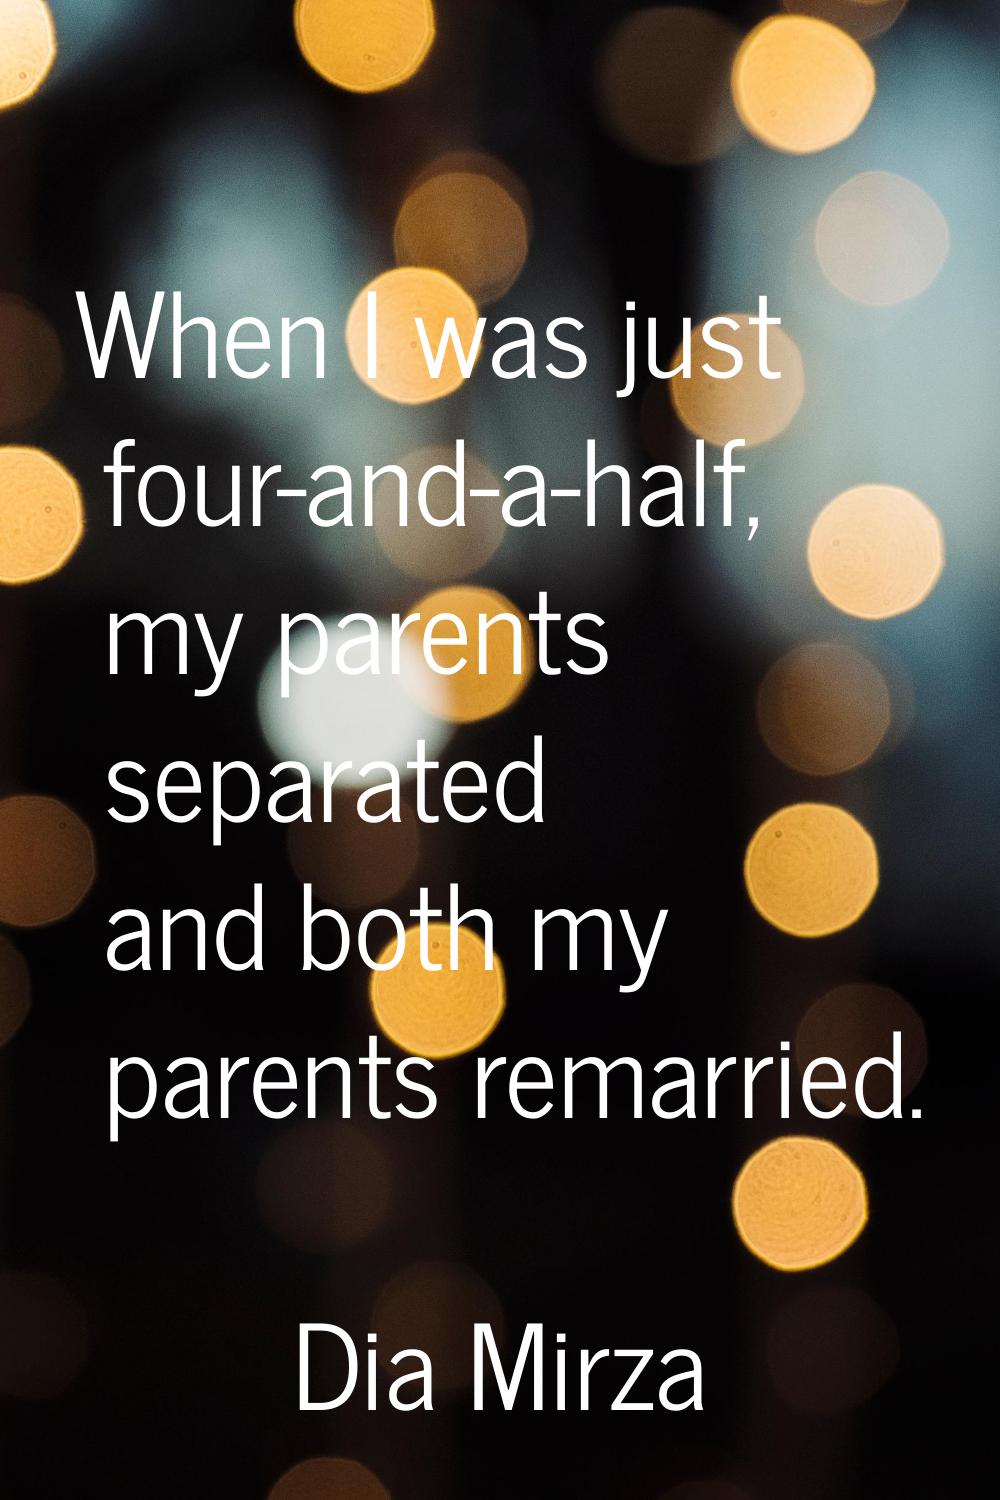 When I was just four-and-a-half, my parents separated and both my parents remarried.